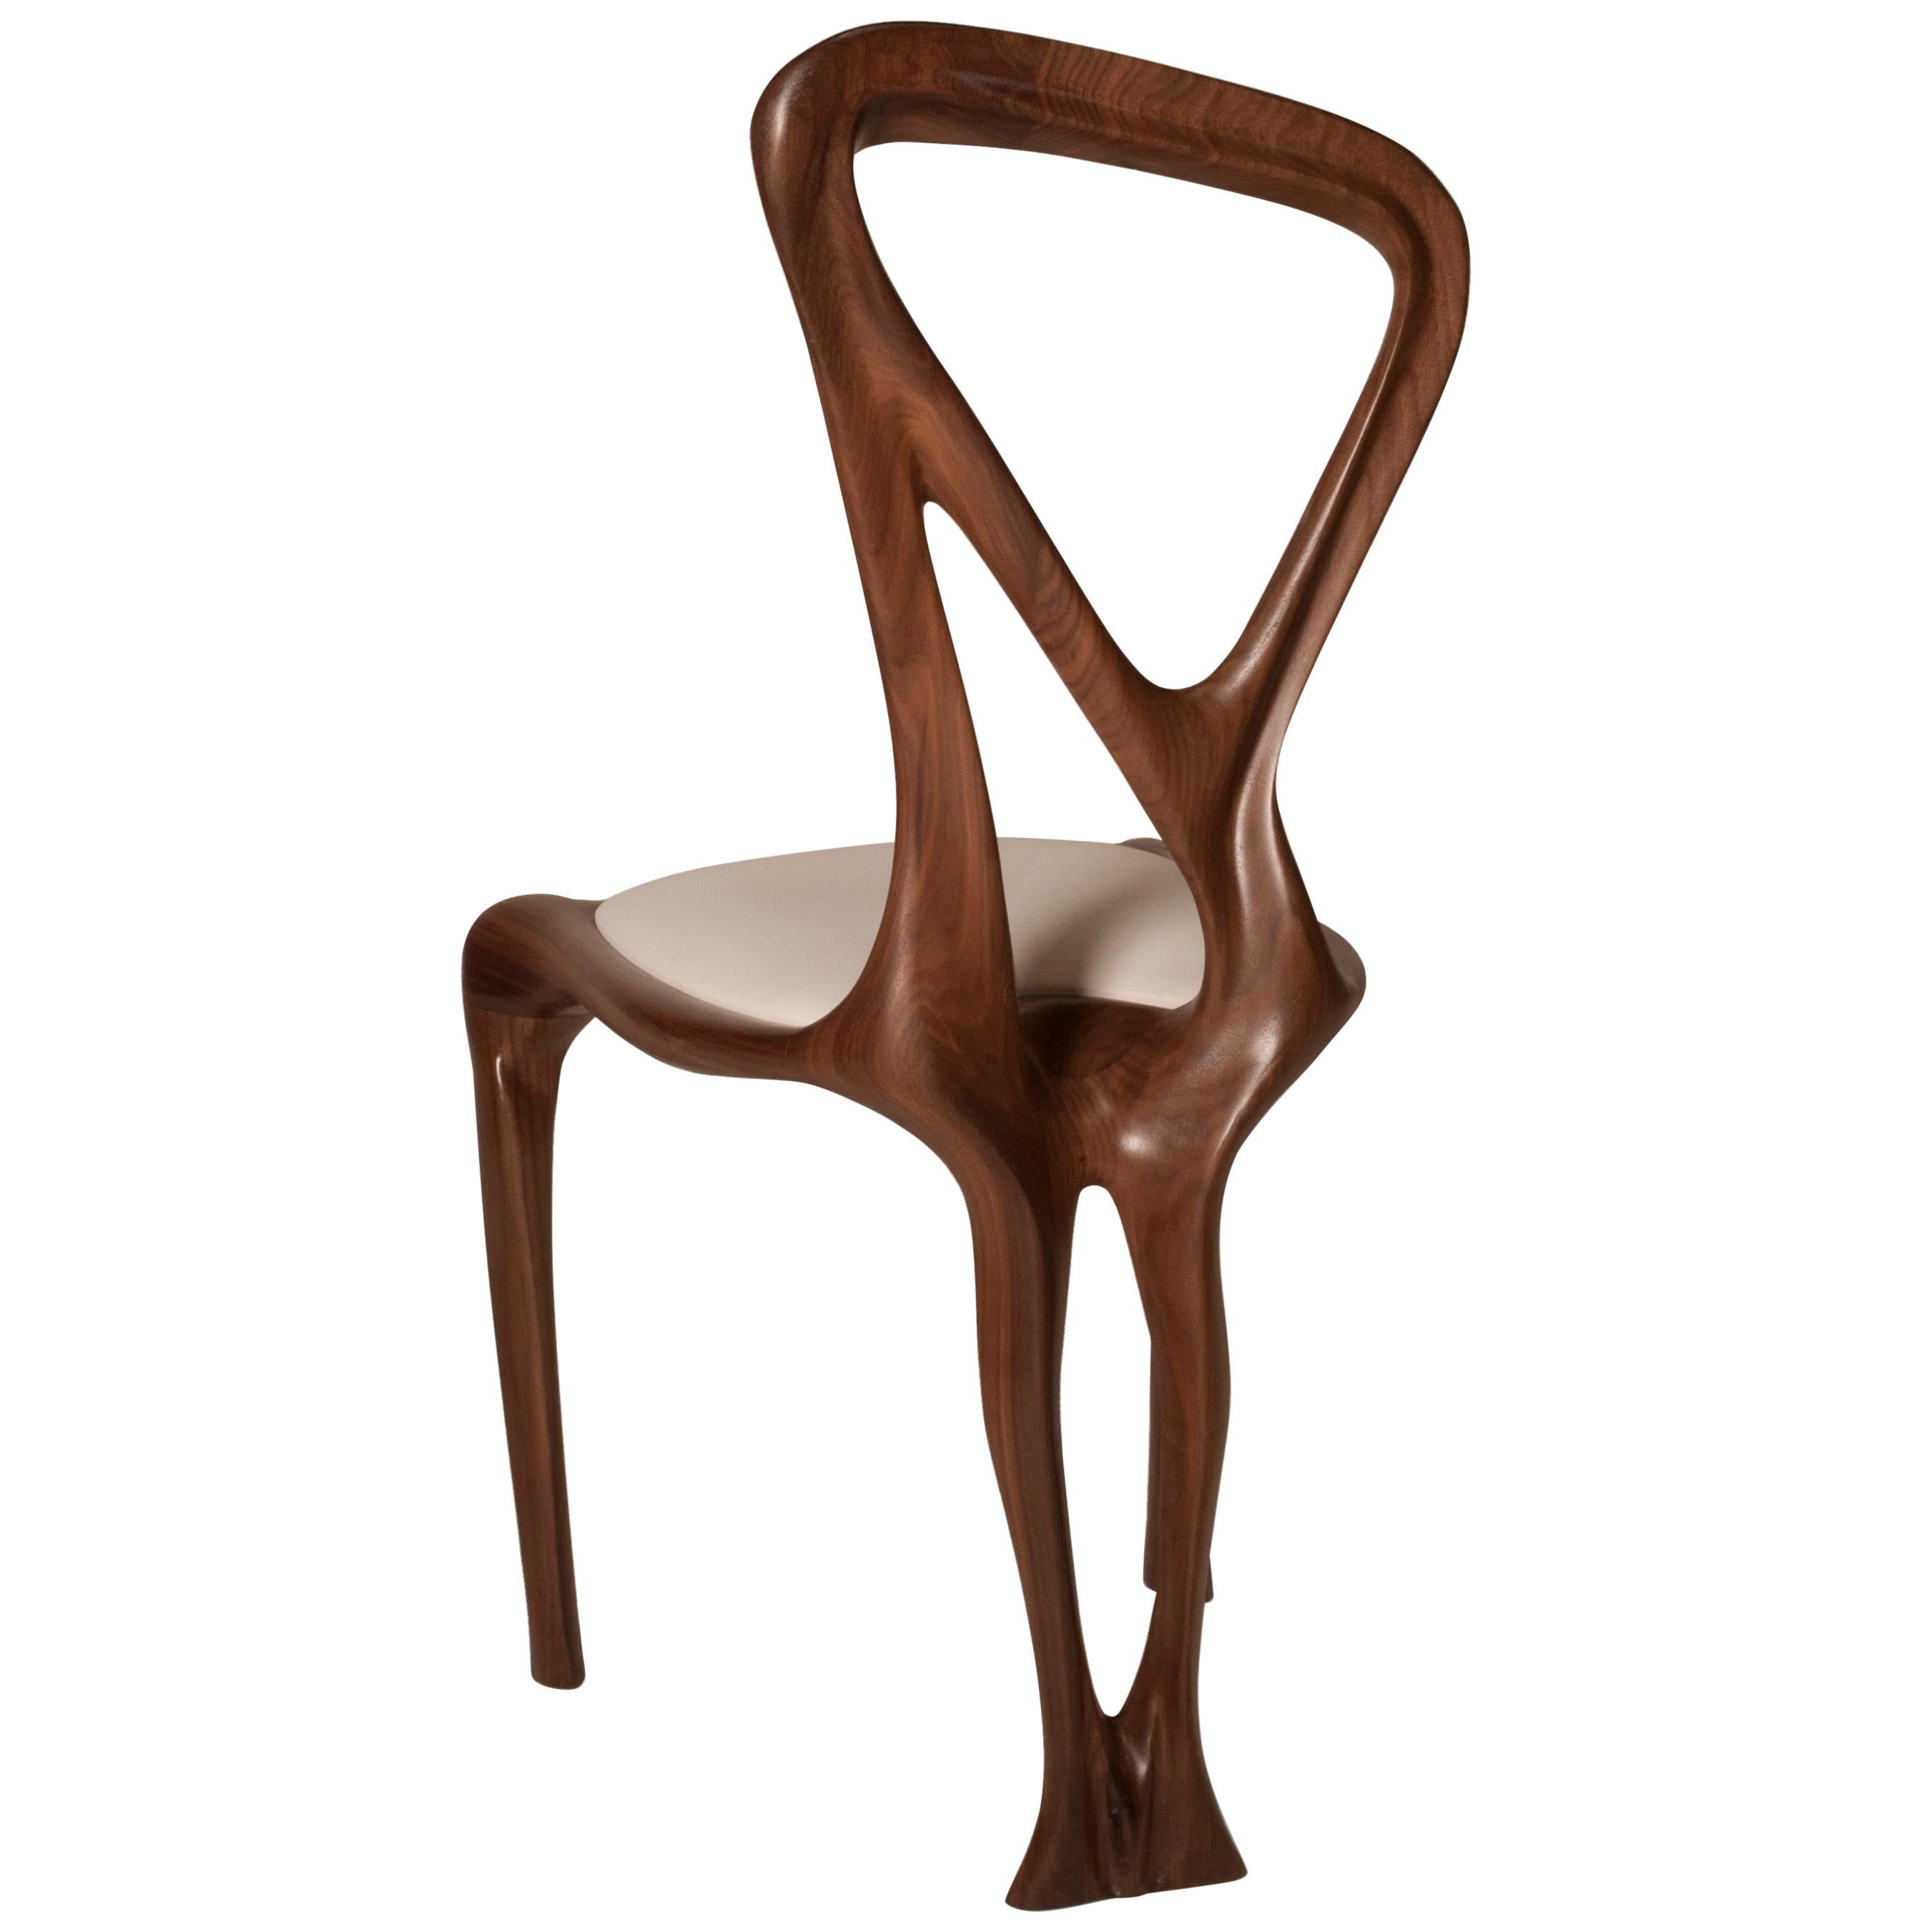 Amorph Gazelle Dining Chair, Solid Walnut, Natural Stain